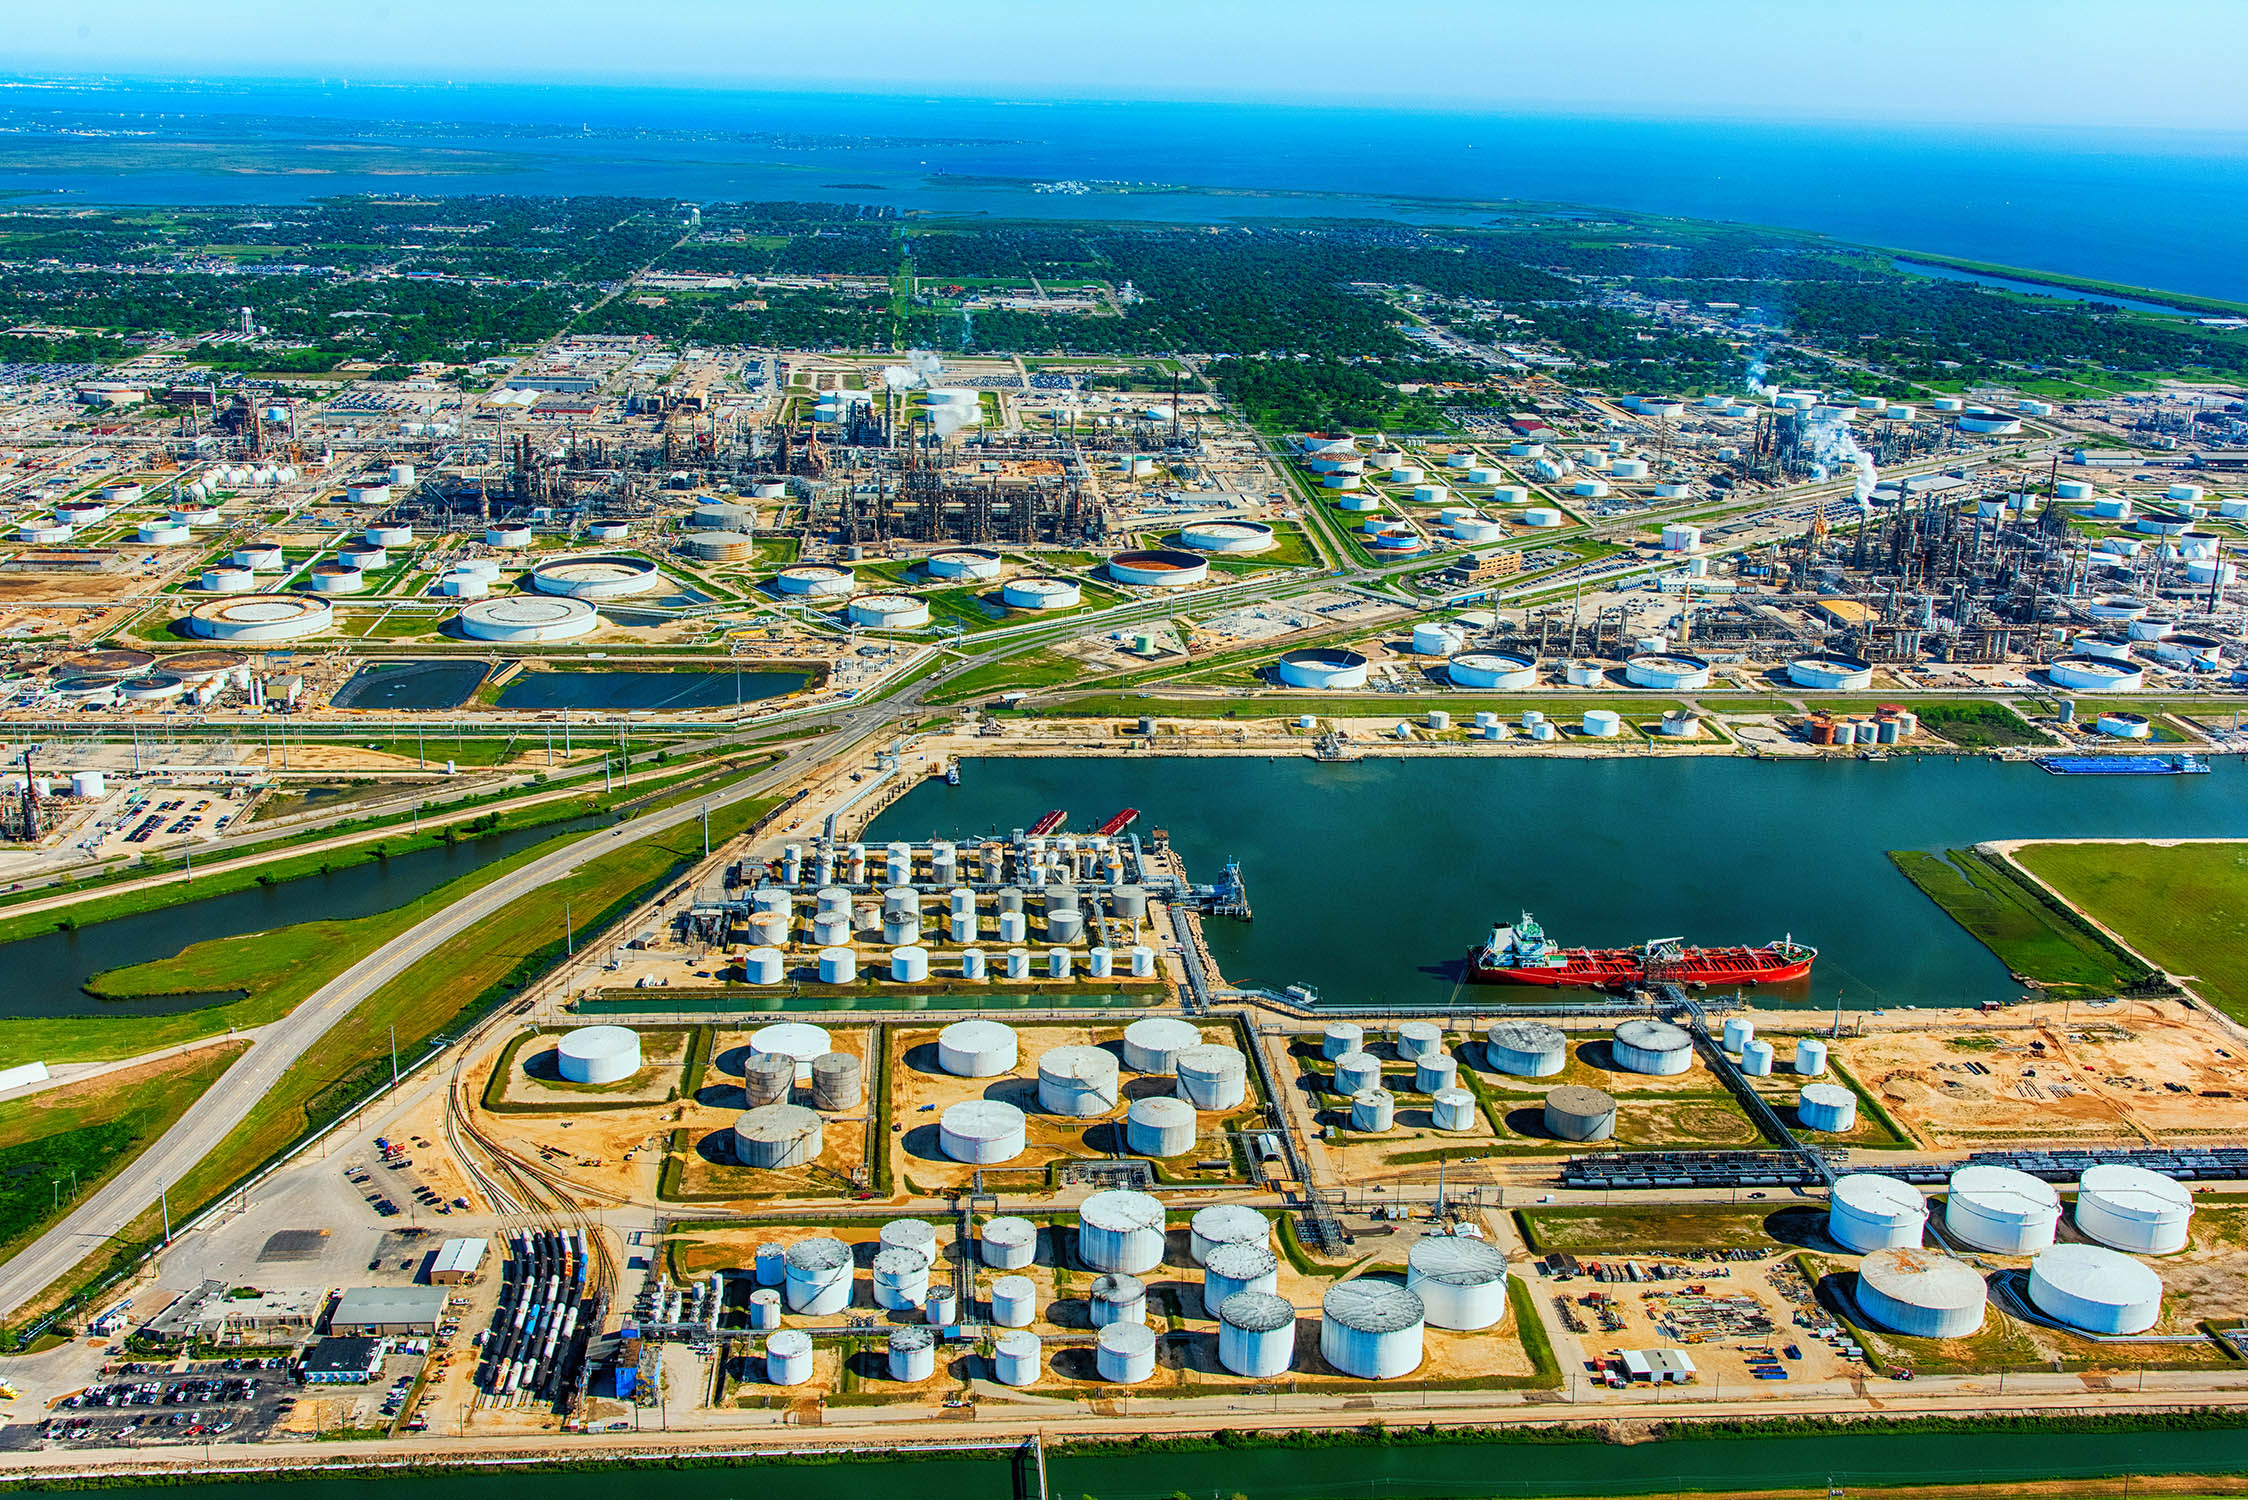 Aerial view of an oil refinery in Texas City, Texas, located just south of Houston on Galveston Bay